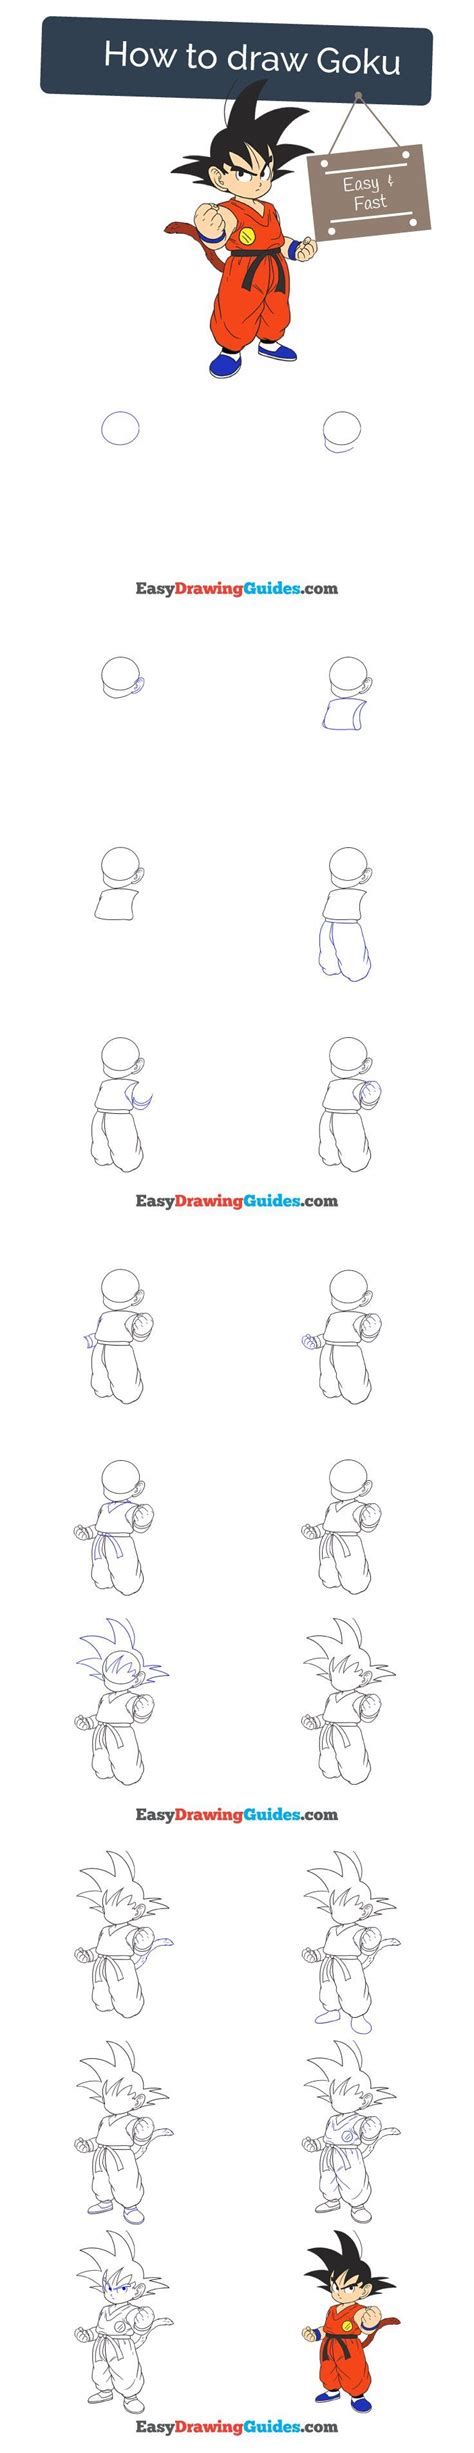 The step by step images will explain how. How to Draw Goku in a Few Easy Steps | Goku drawing ...